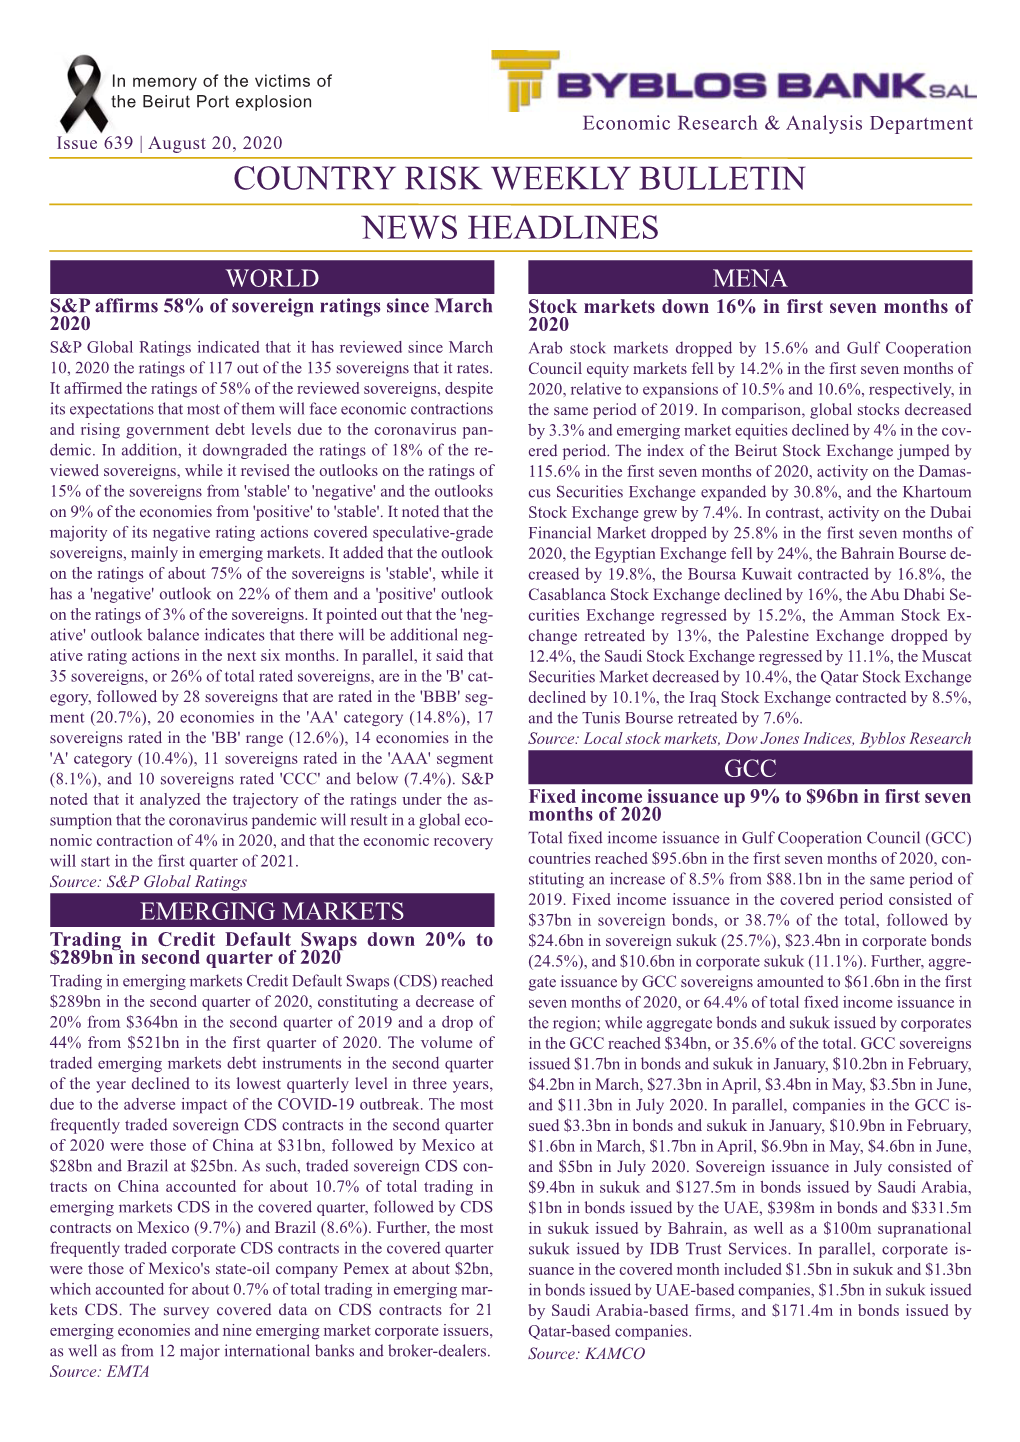 Country Risk Weekly Bulletin